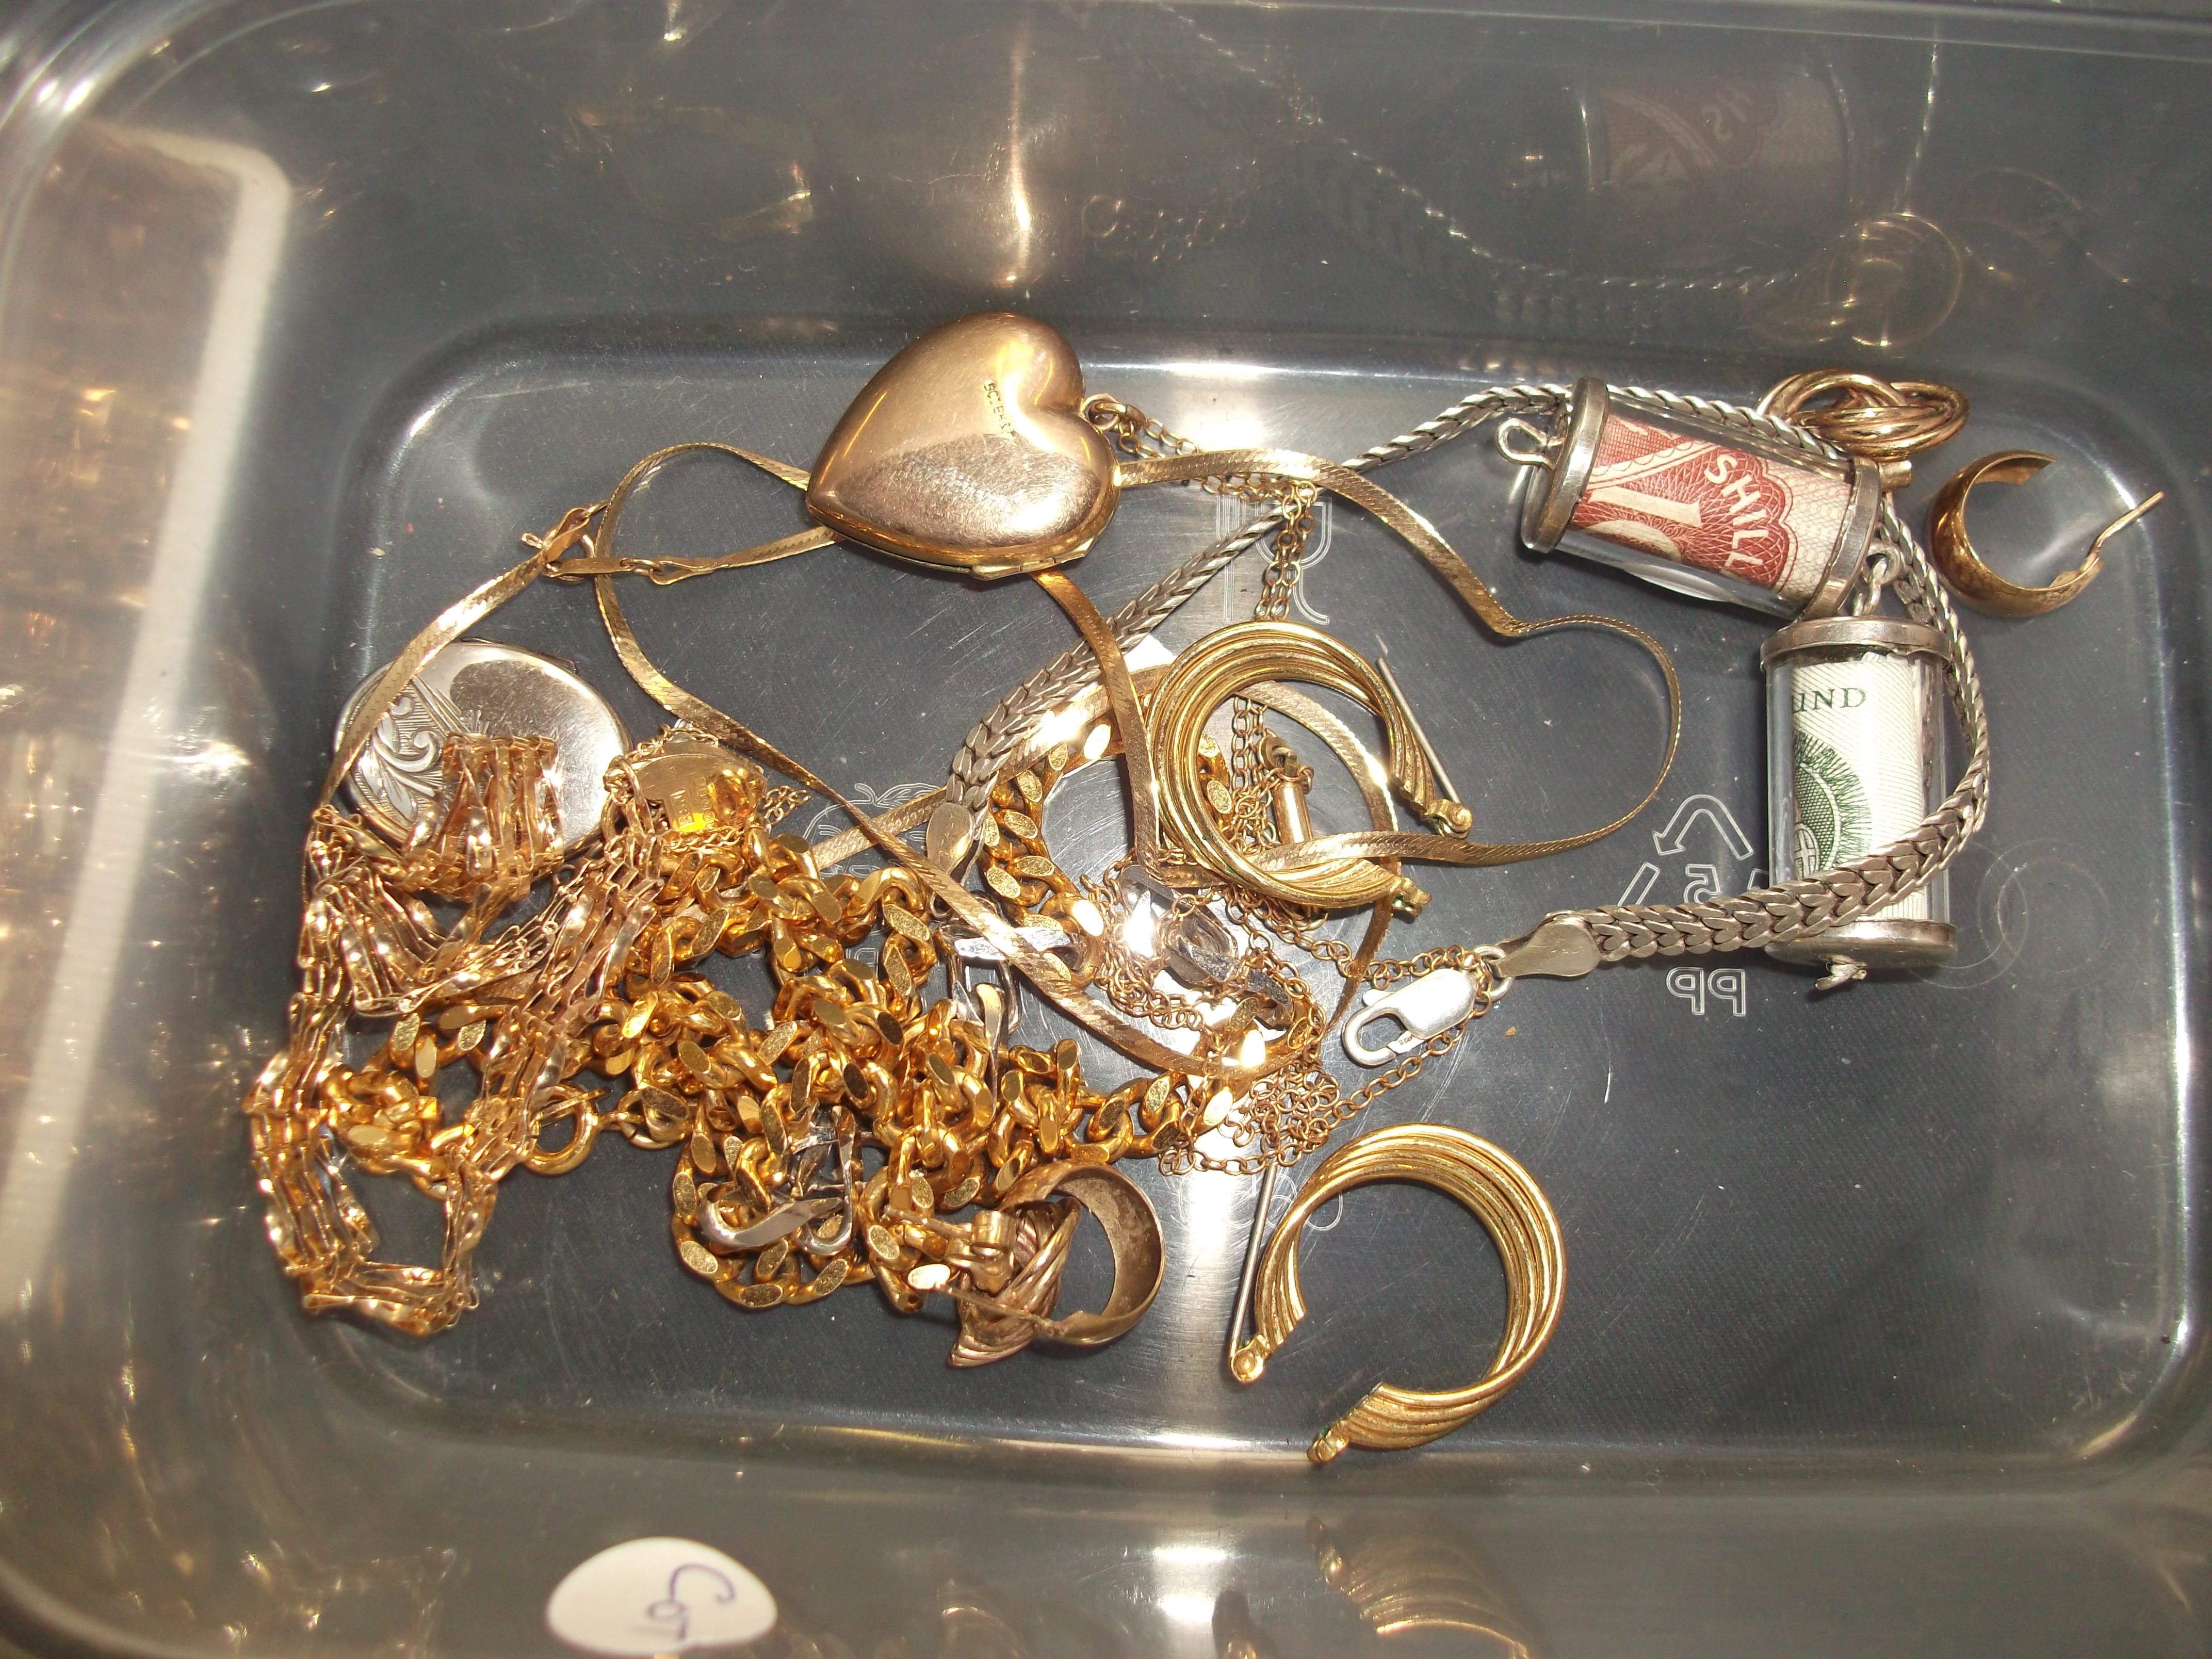 misc jewellery incl gold